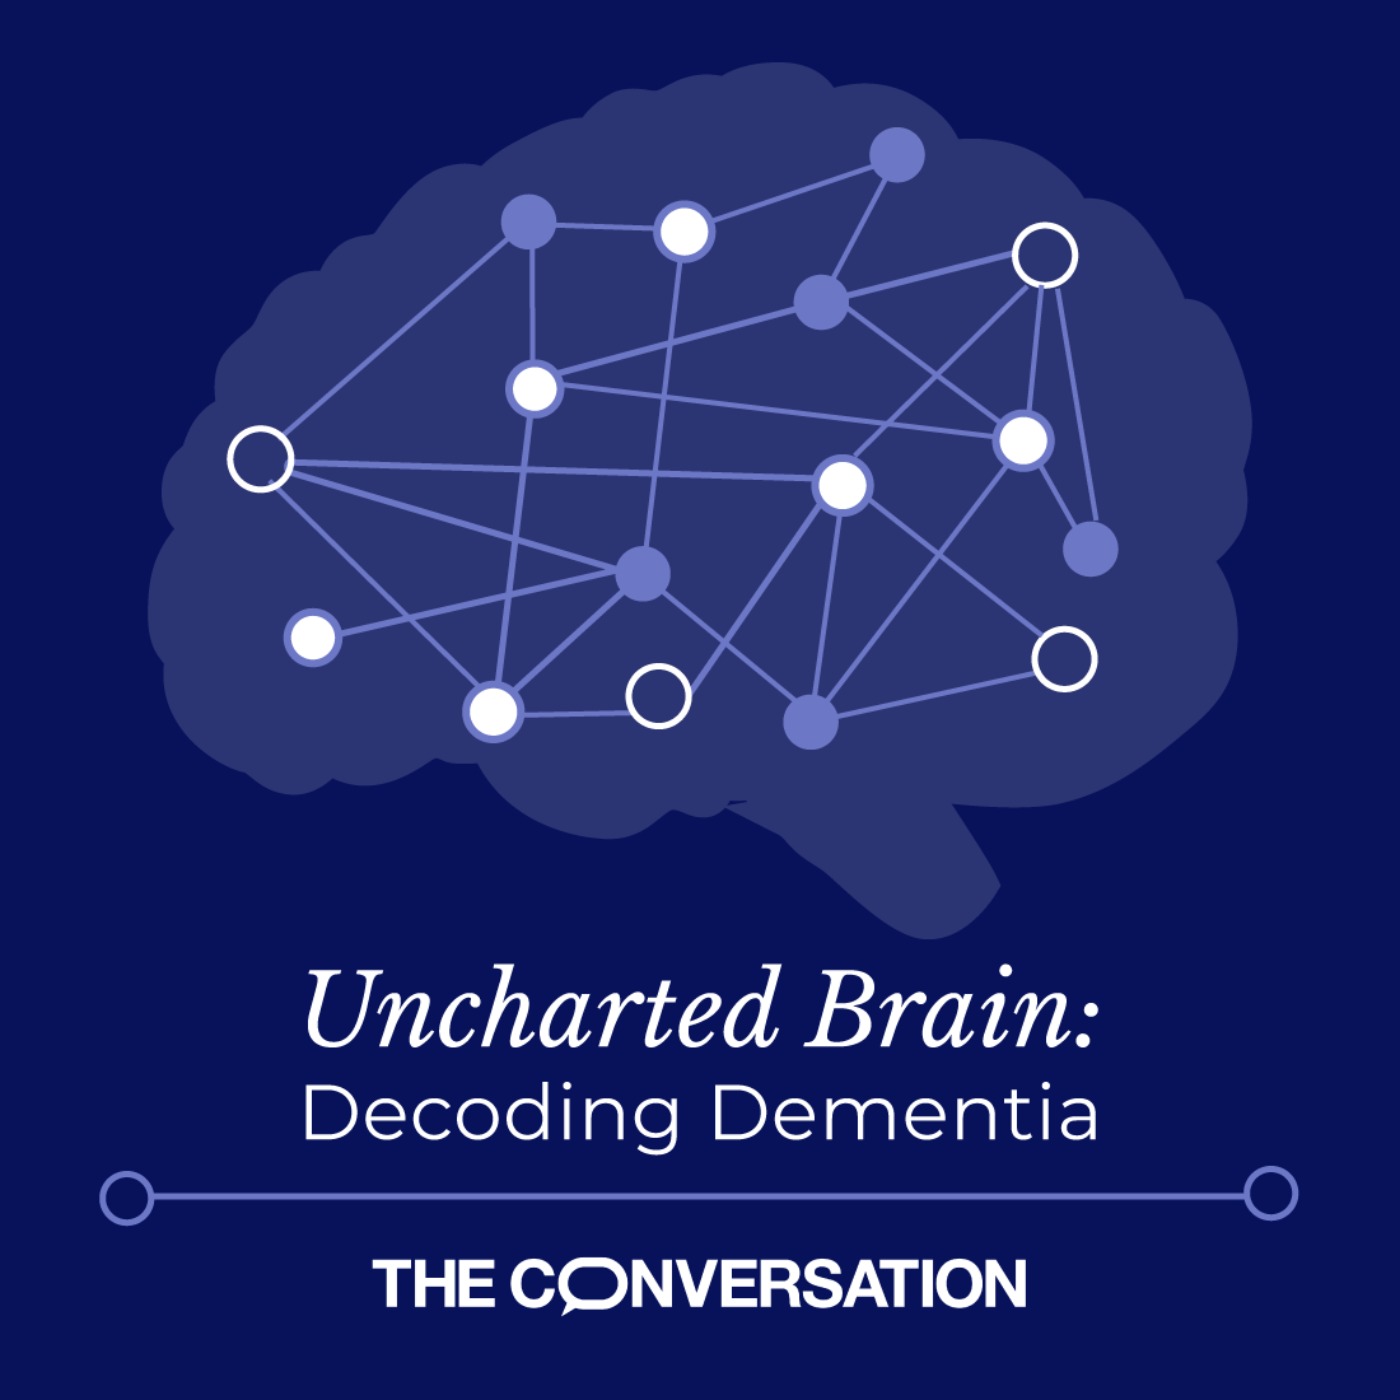 Uncharted Brain 2 : the family trauma of dementia from sports injuries